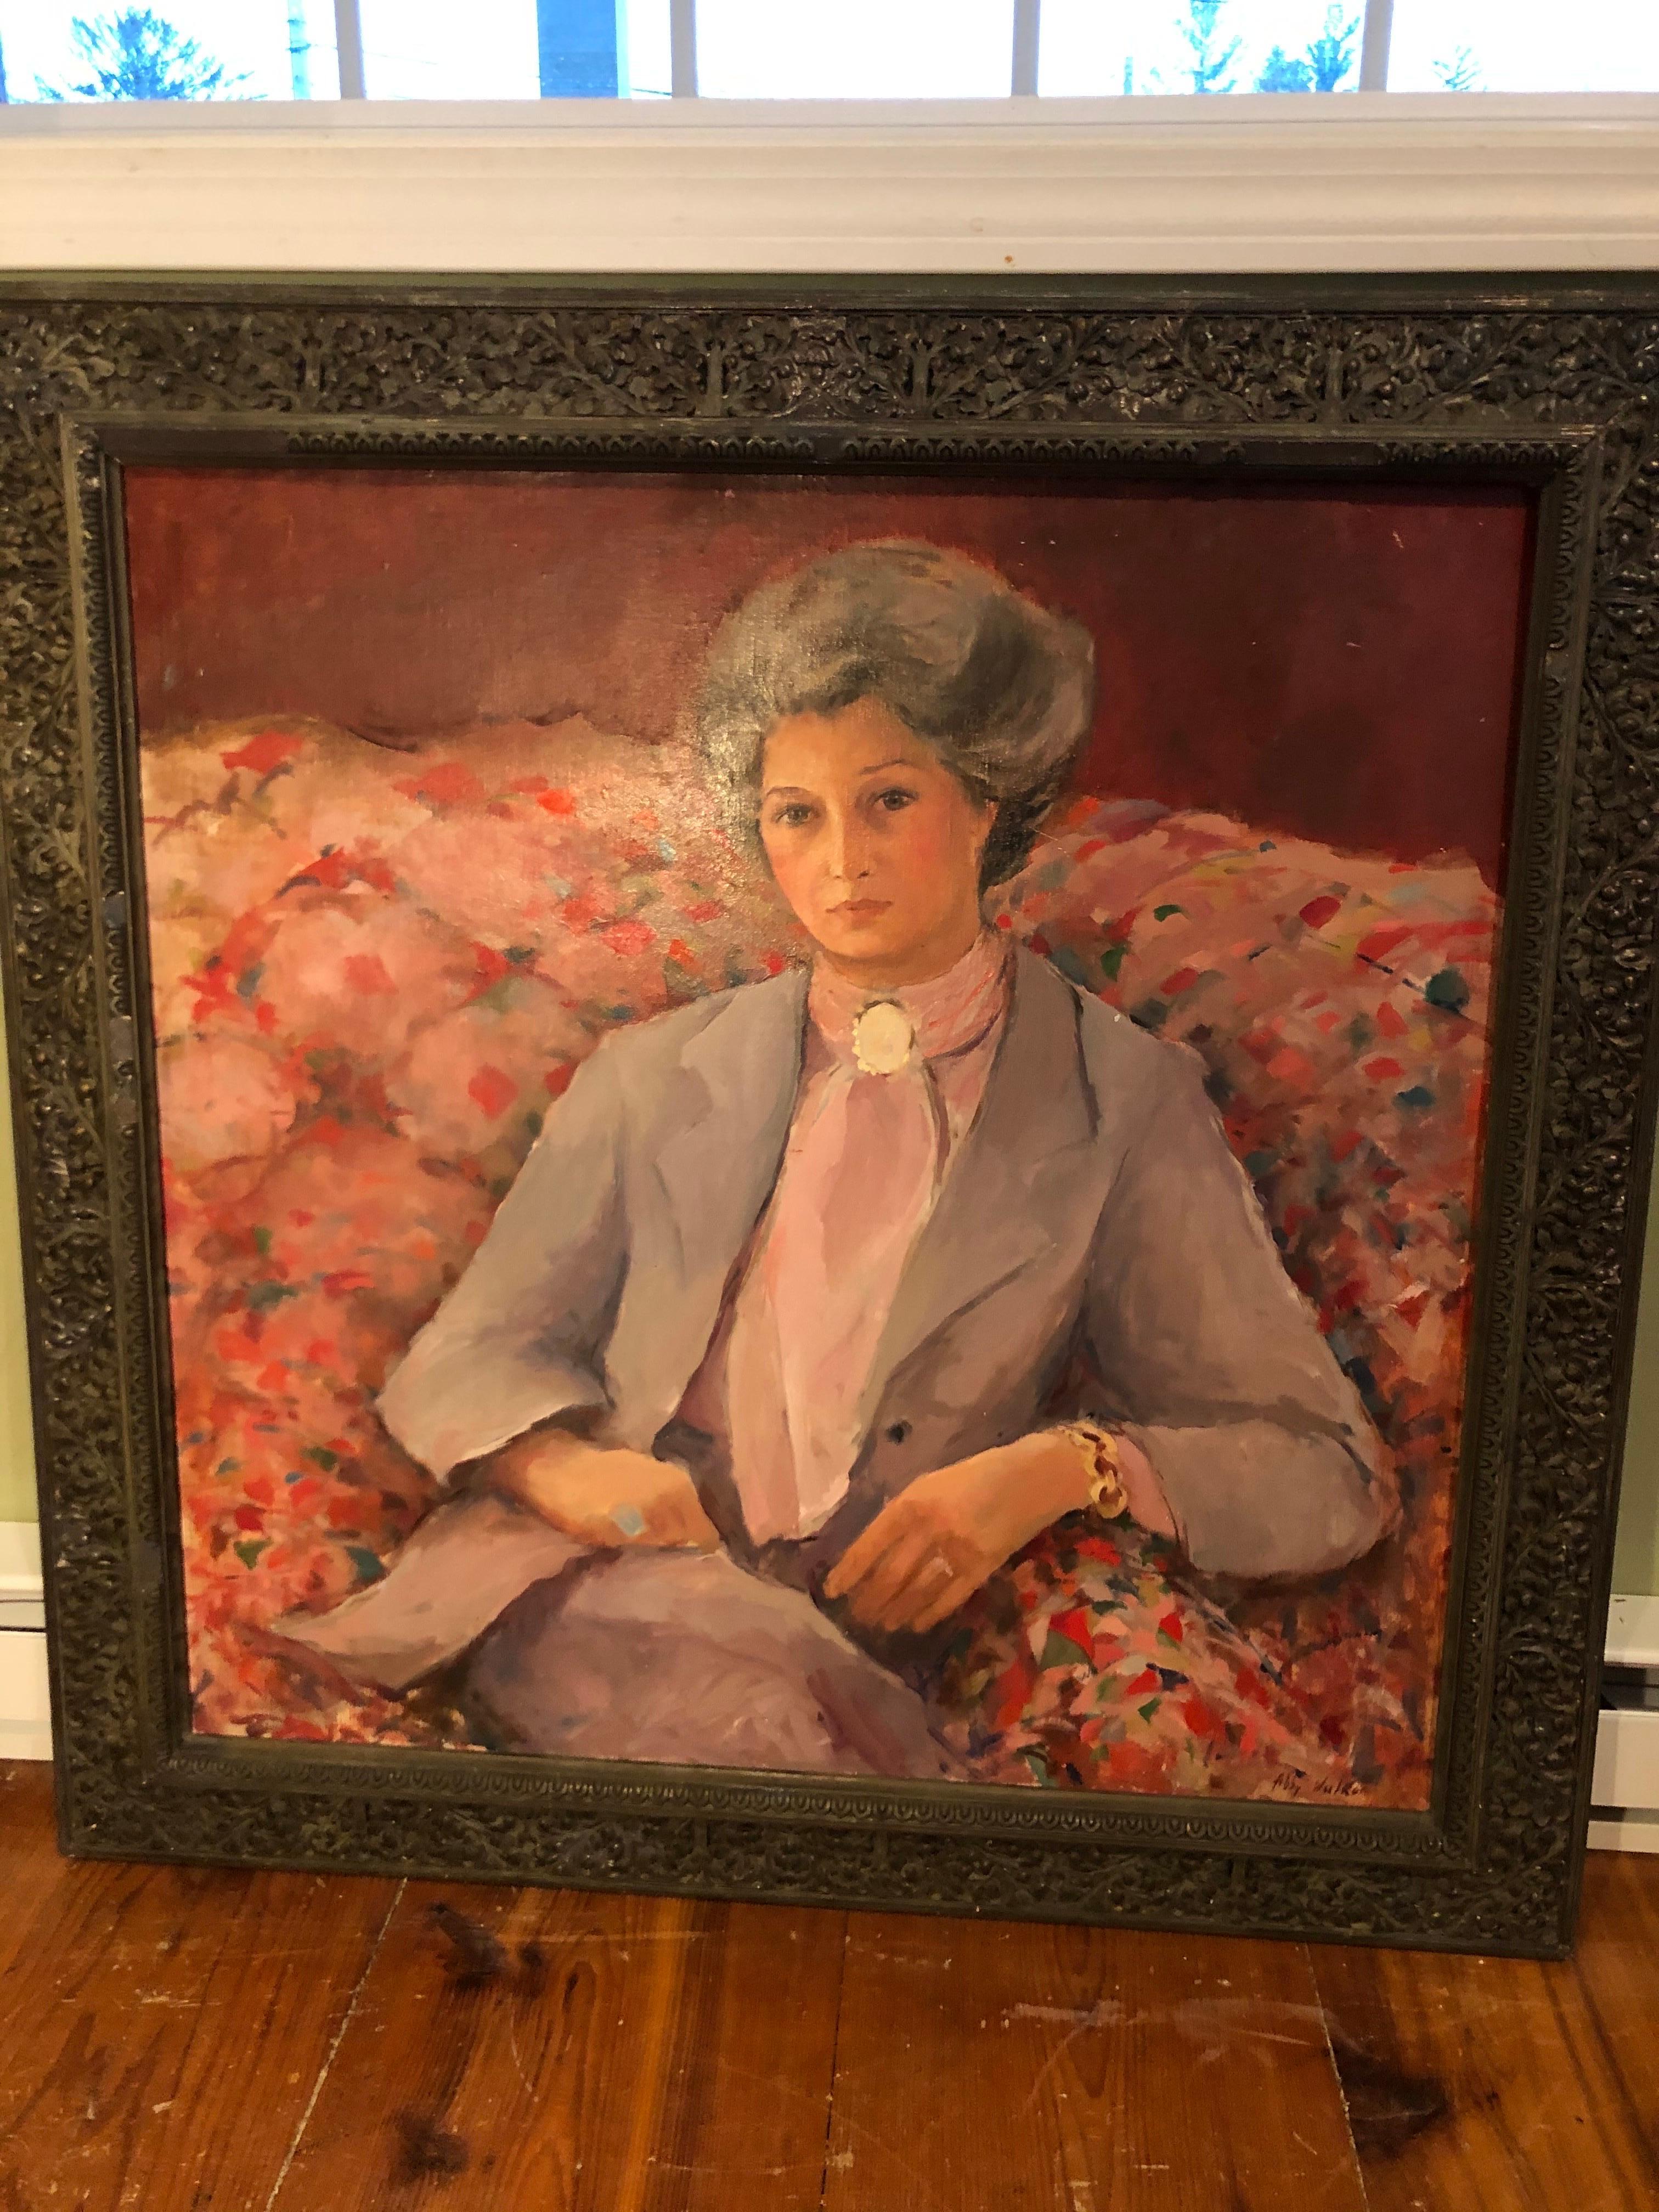 Large Square Impasto Portrait of a Woman by Abby Walker. Amazing compostion of older woman sitting on a patterned sofa. Heavy impasto style with robust color and a very acute attention to detail. 